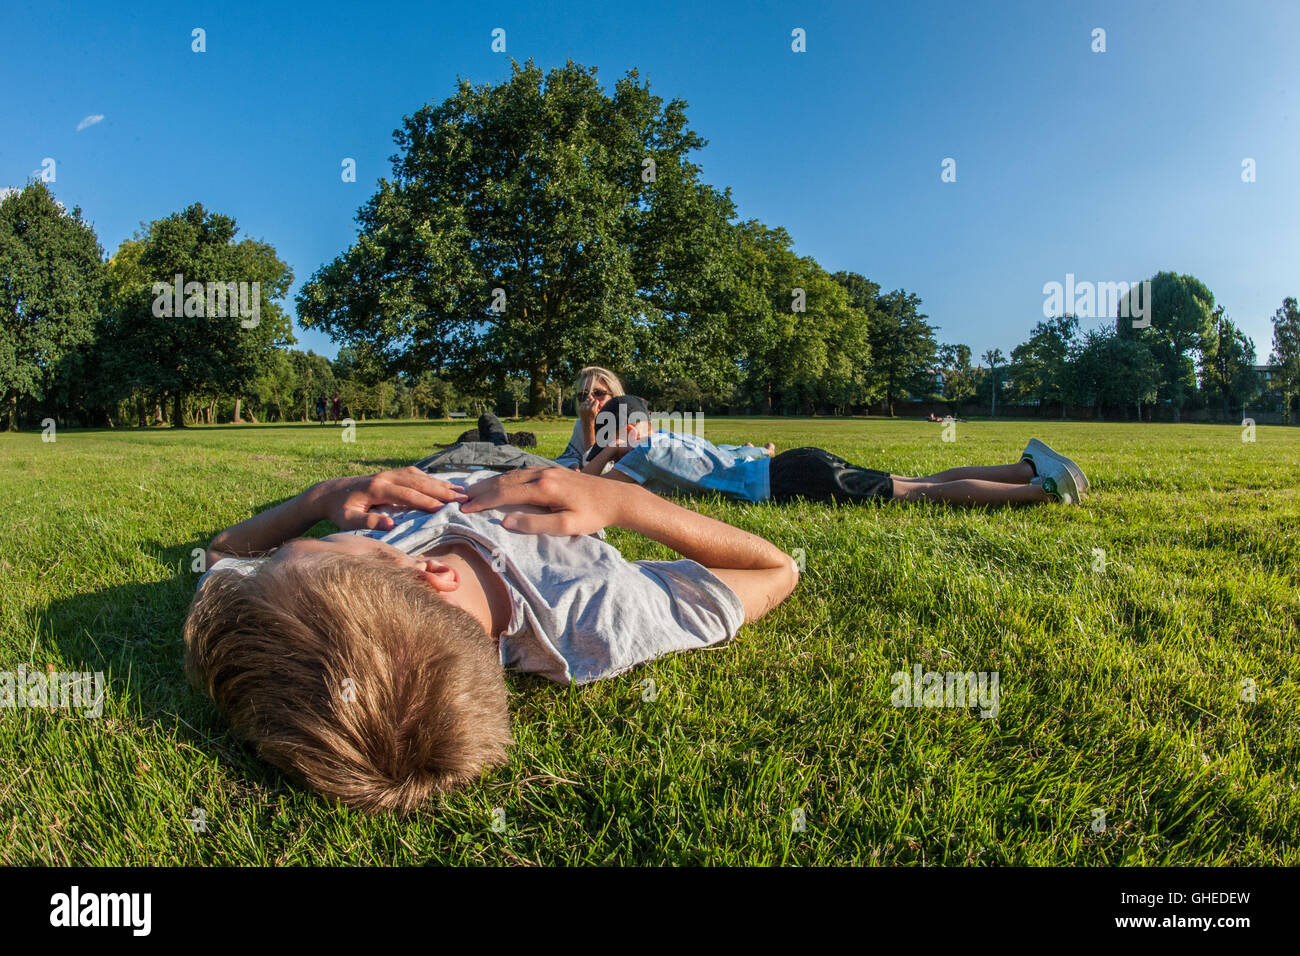 A family picnic in a London park Stock Photo